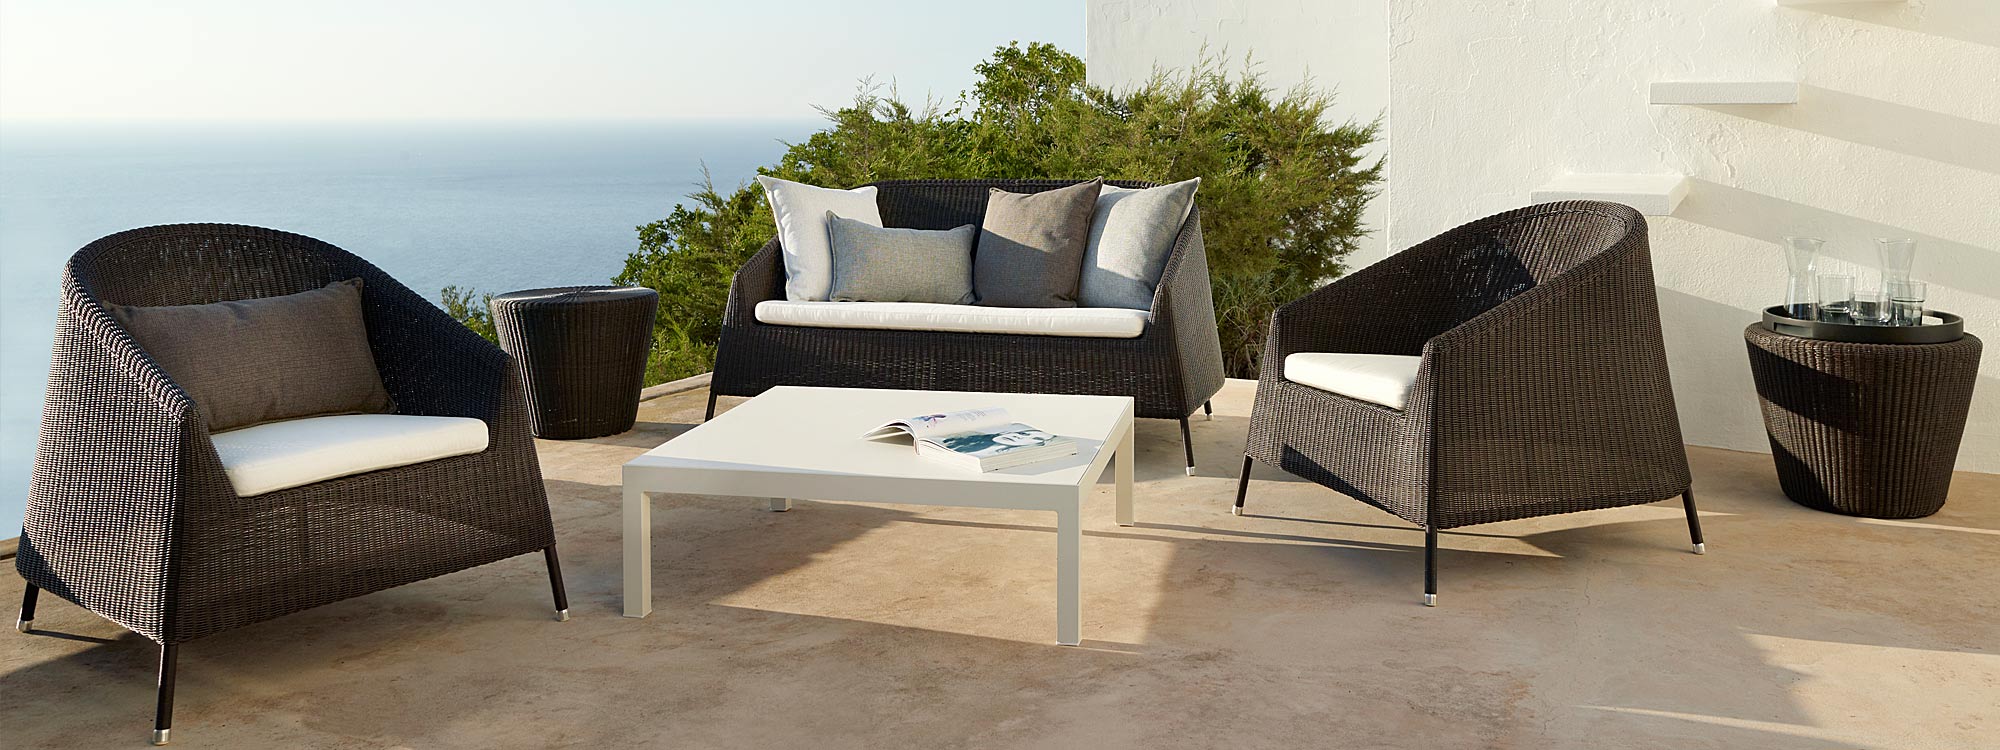 Image of pair of Kingston garden relax chairs an Kingston 2 seat garden sofa in mocca finish by Caneline